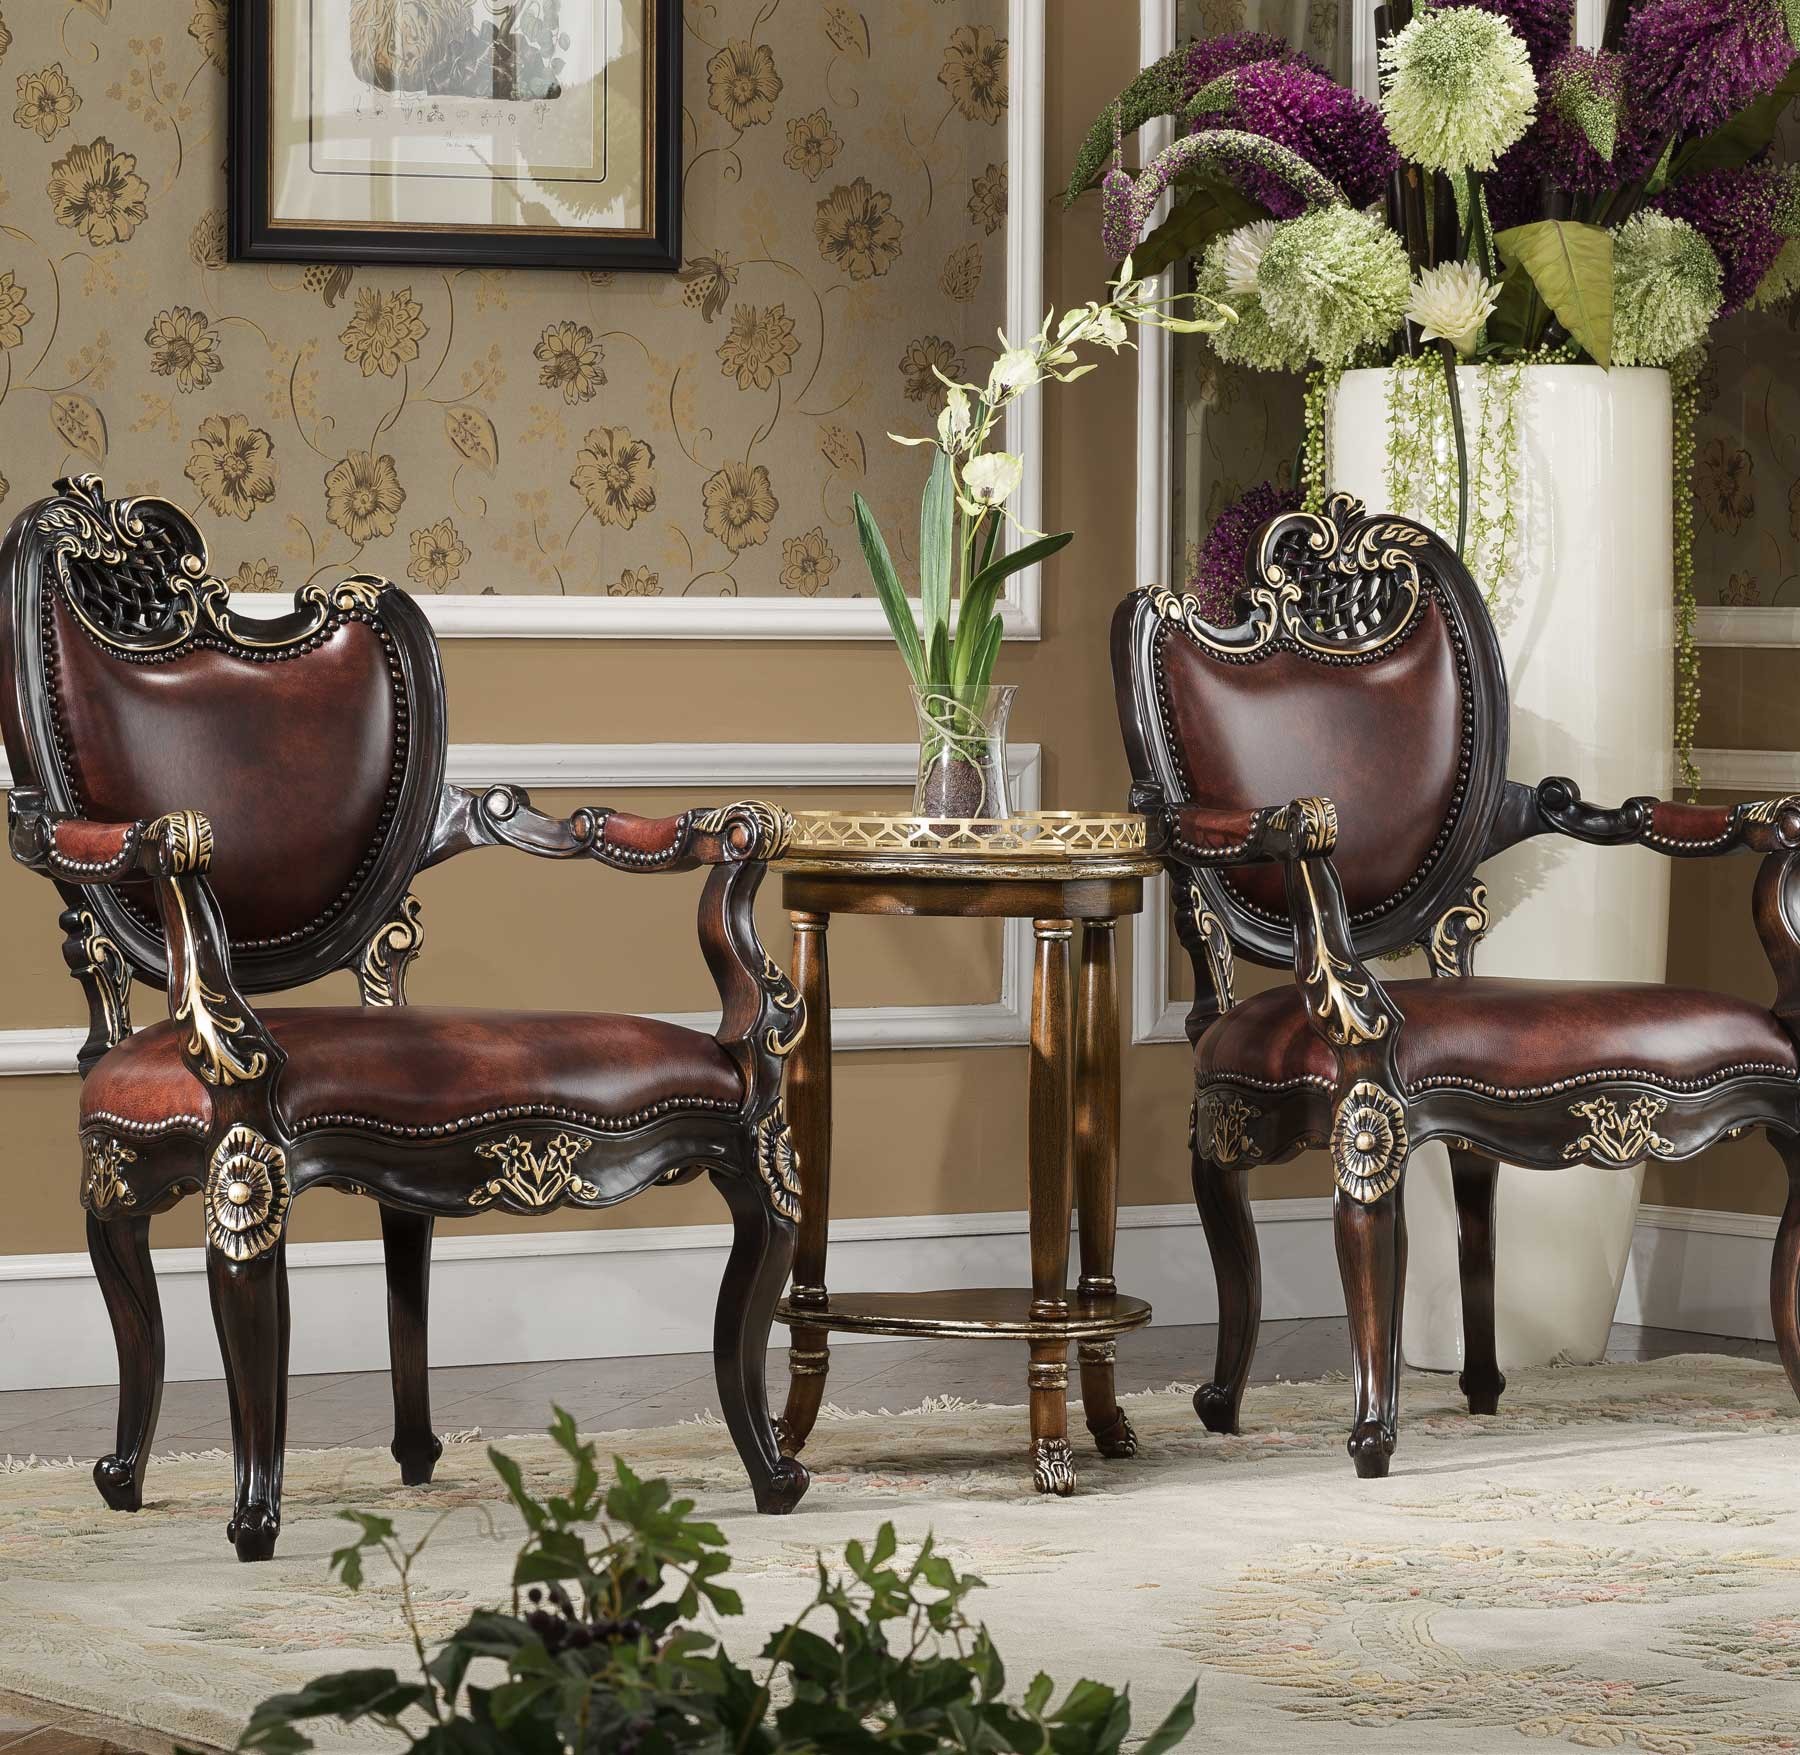 Stirling Chair shown in Vintage Truffle finish